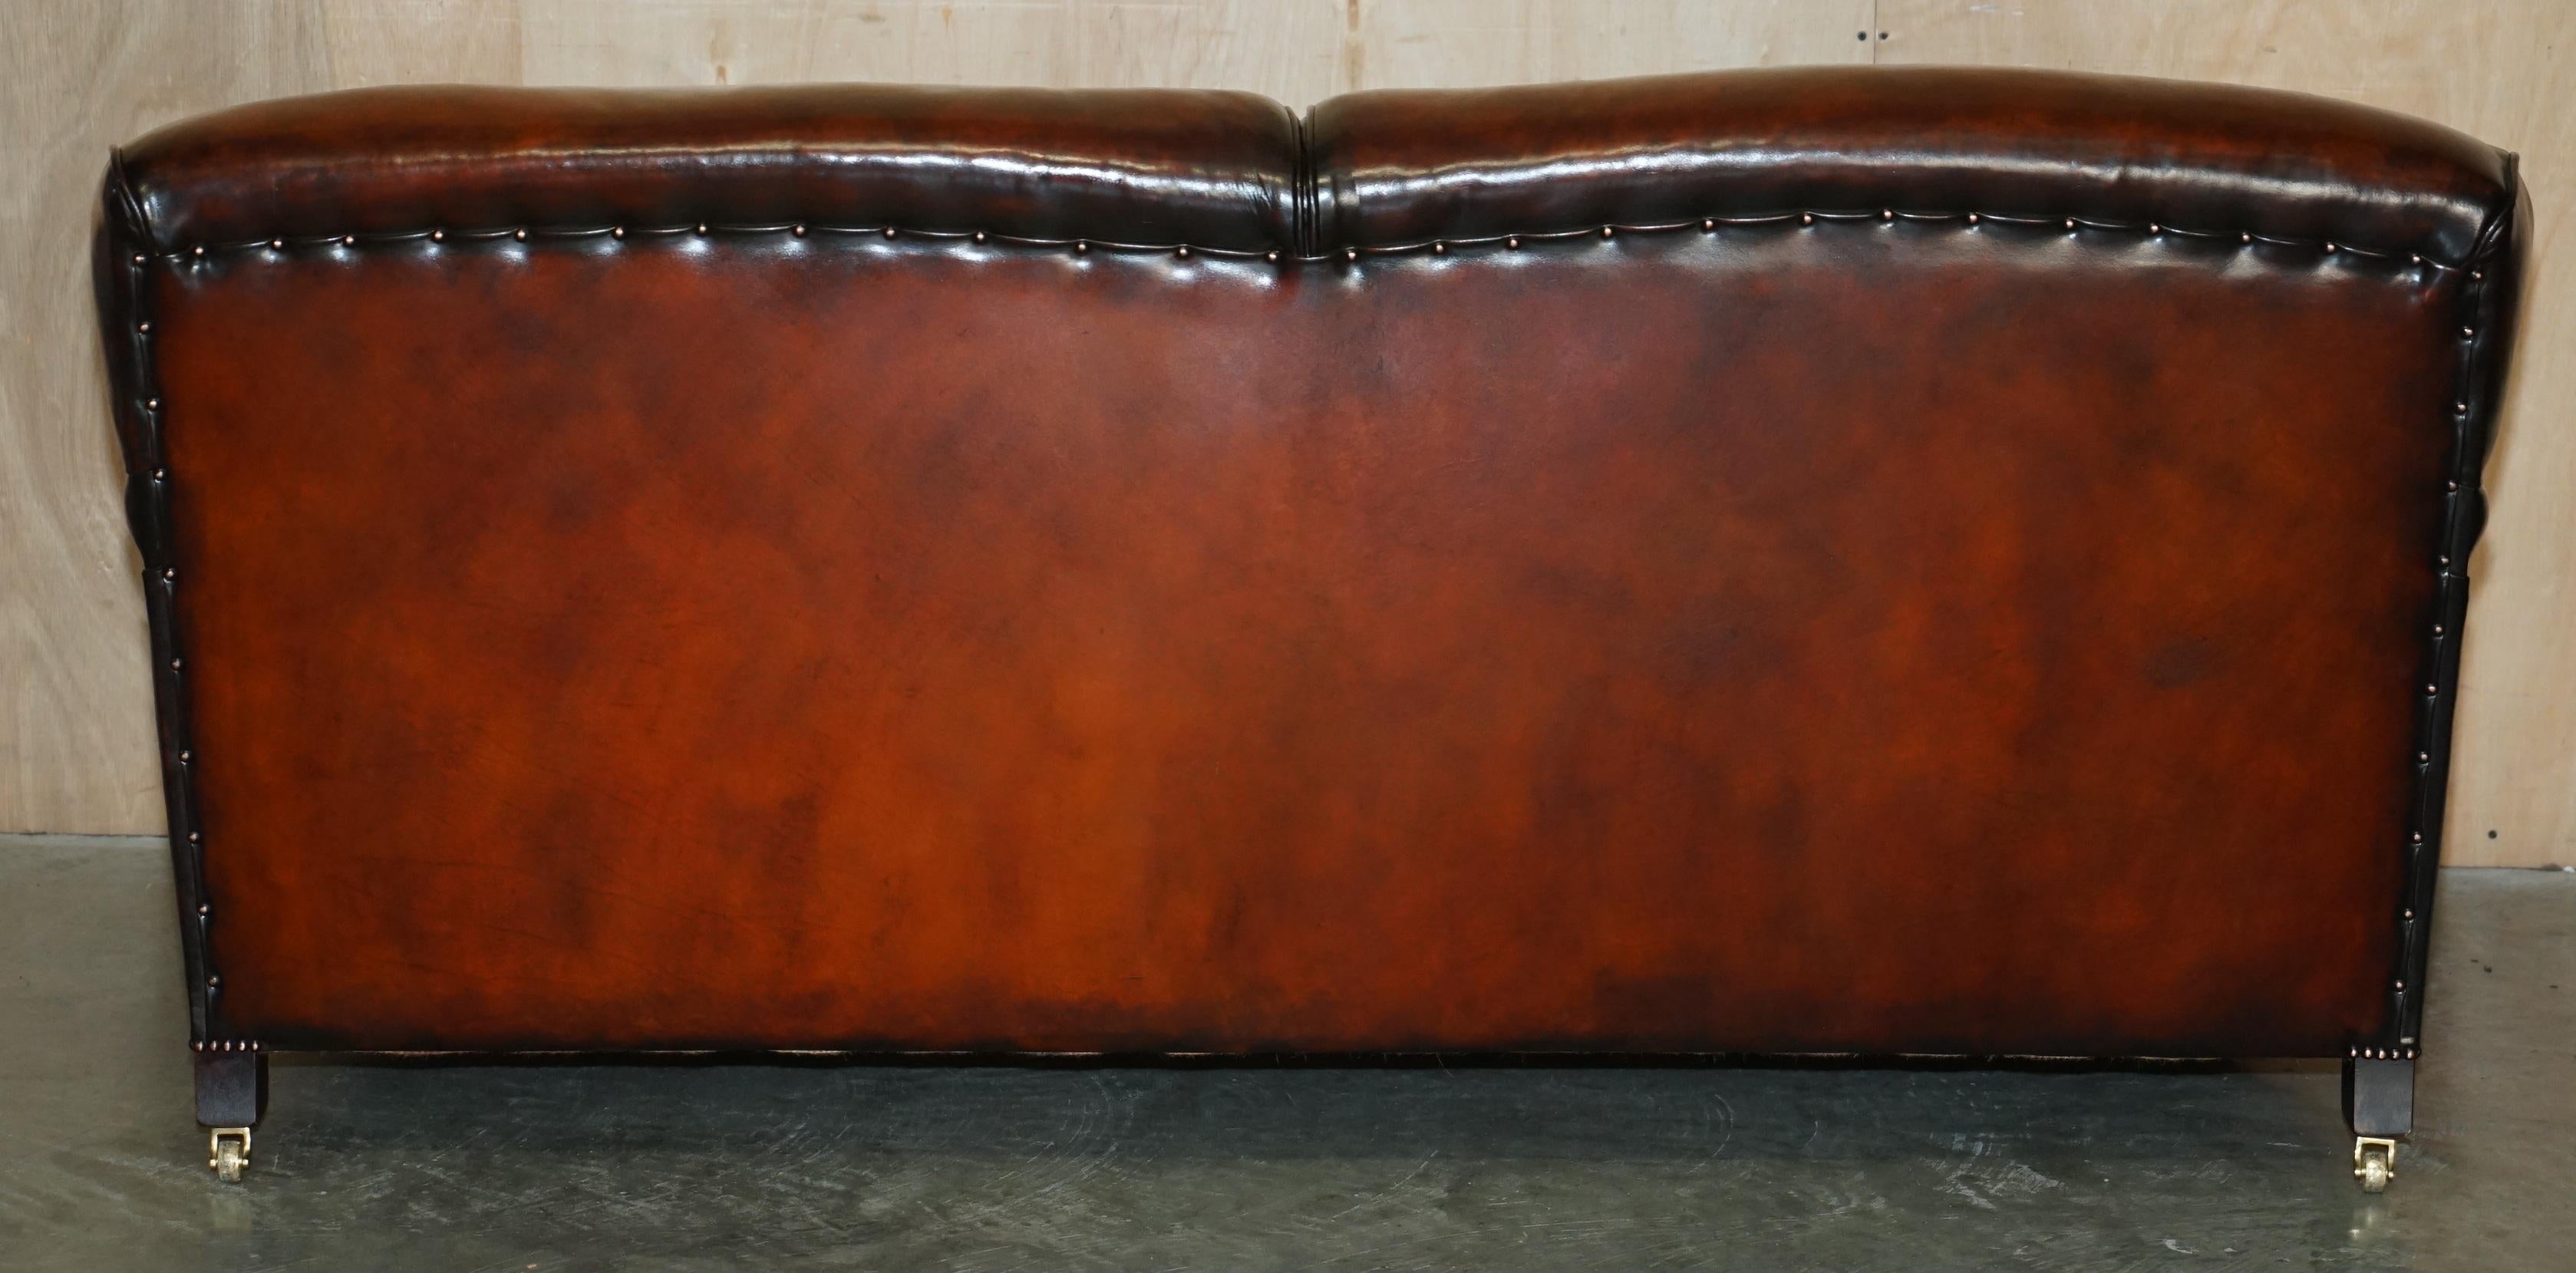 RESTORED GEORGE SMITH HOWARD & SON'S STYLE BROWN LEATHER SiGNATURE SCROLL SOFA 11